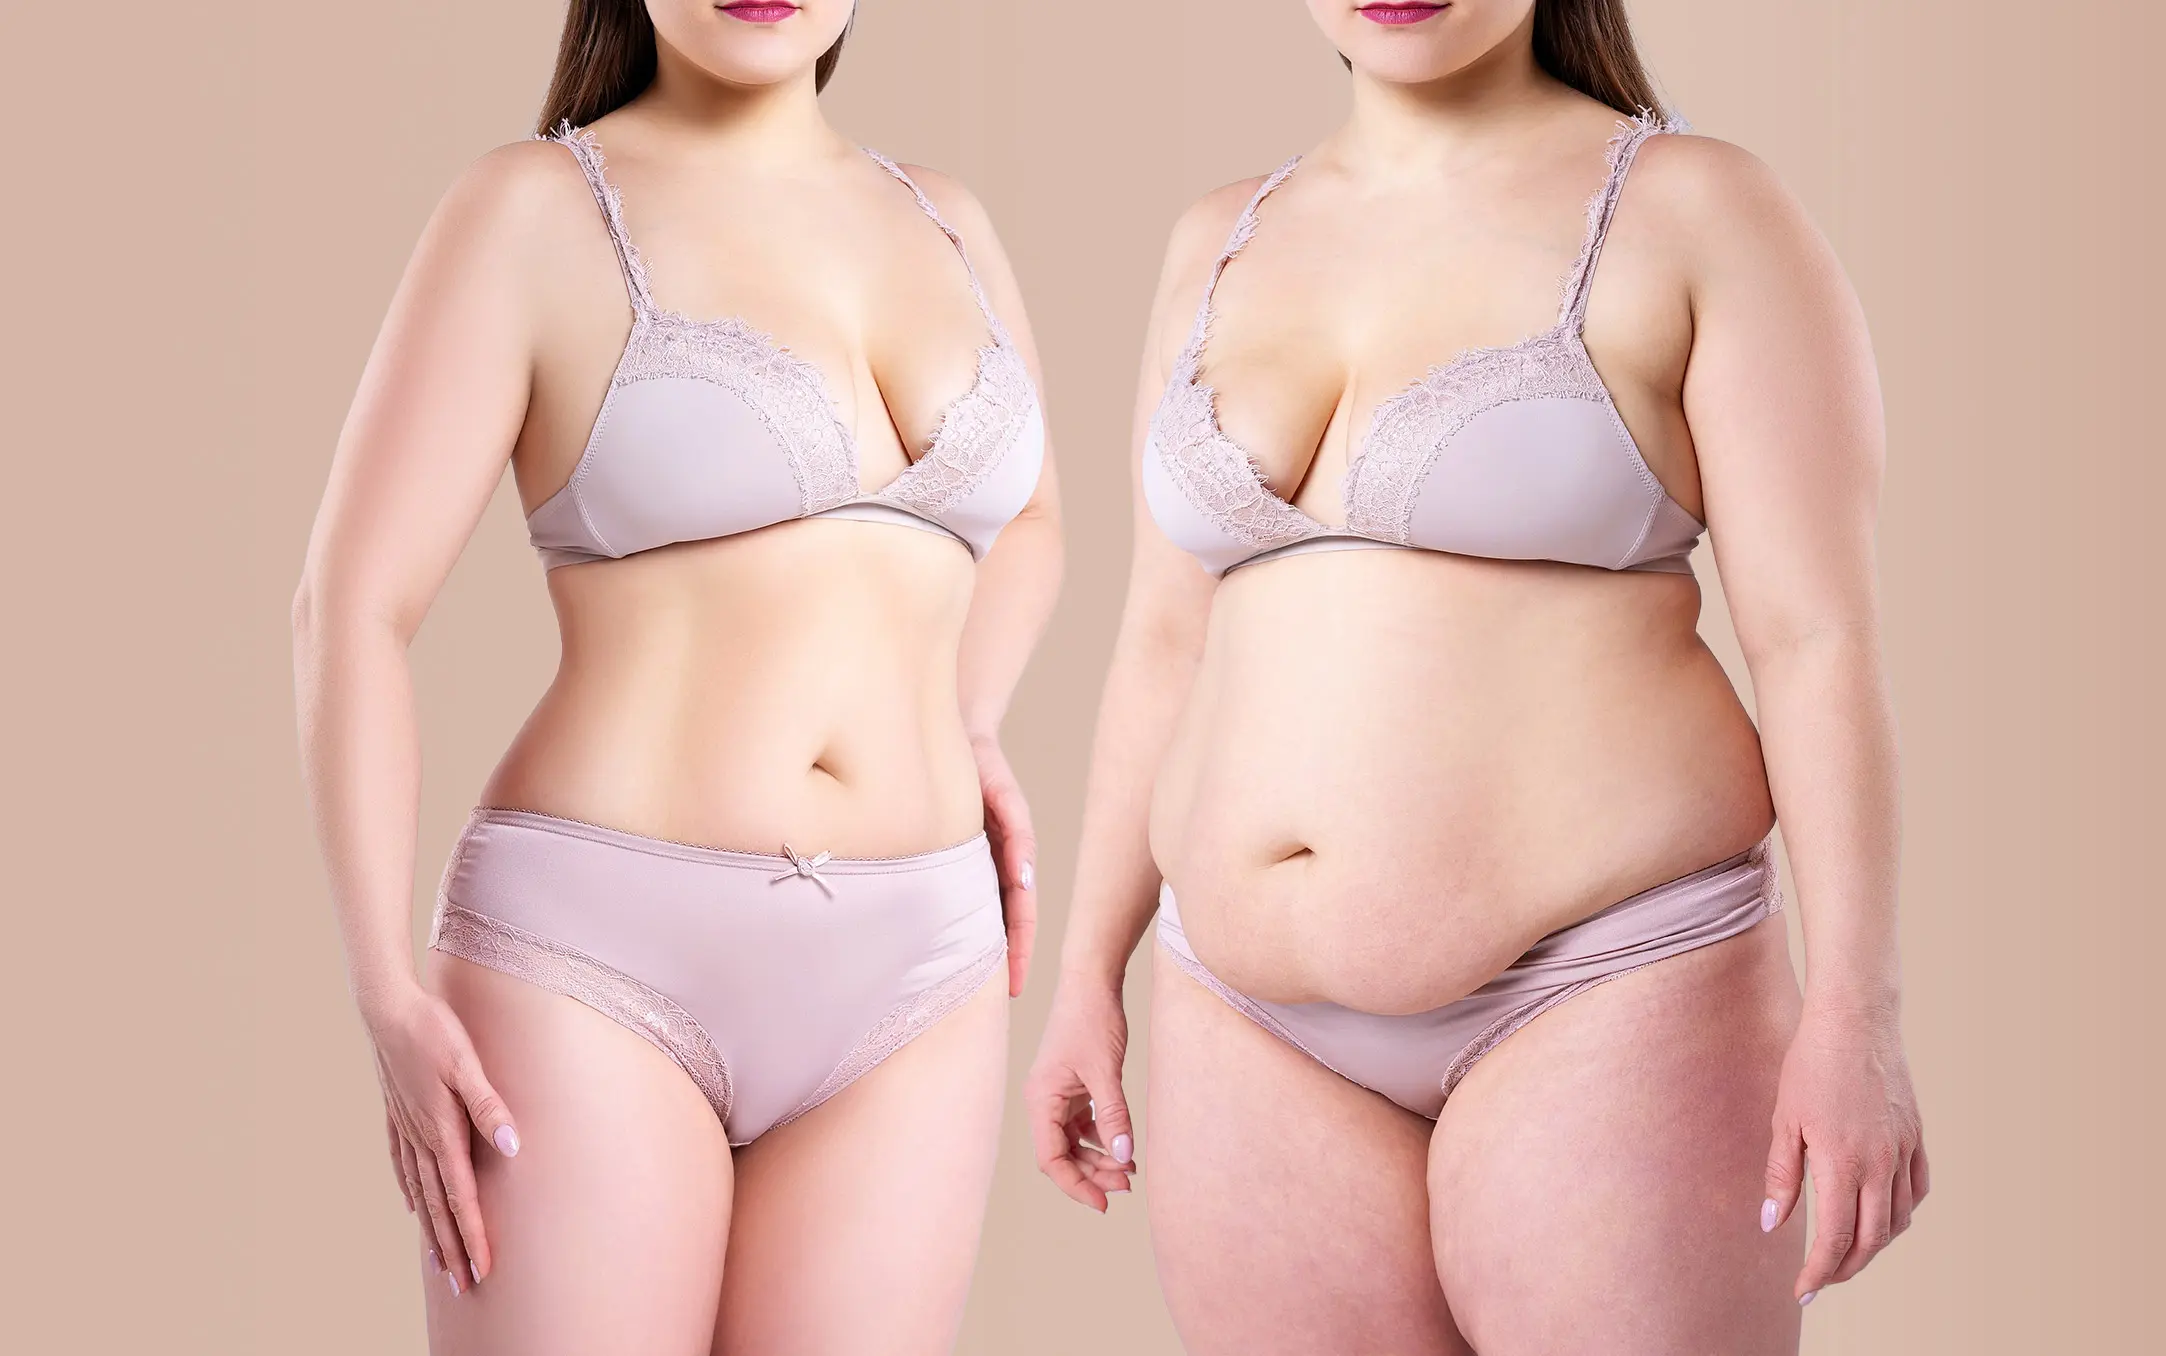 How Much Does A Tummy Tuck (Abdominoplasty) Cost? - The Lotus Institute